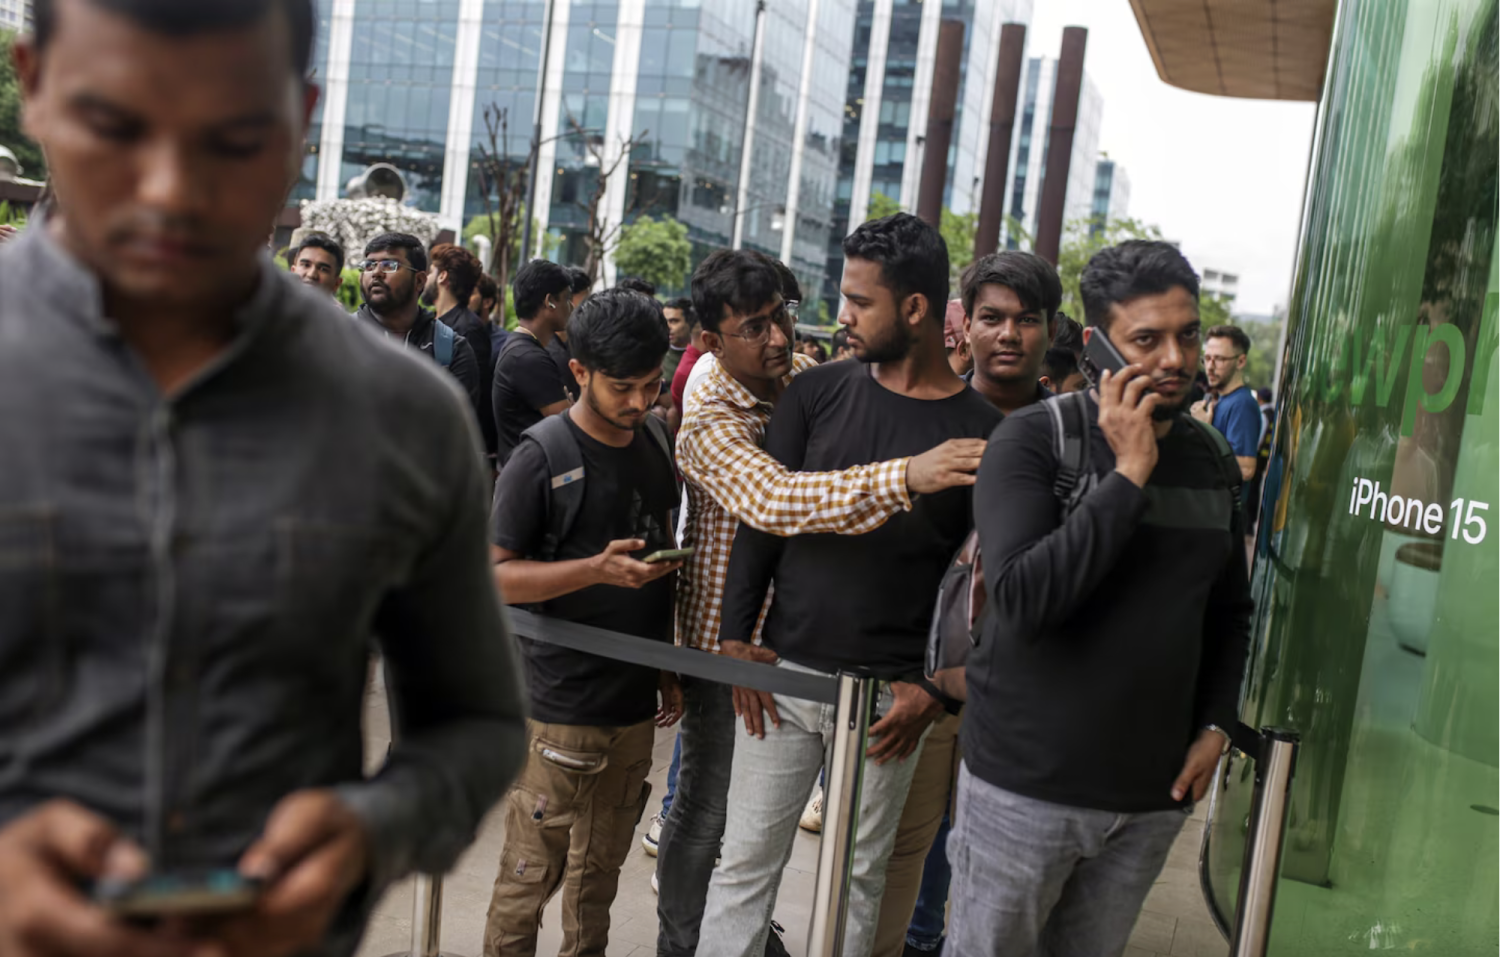 Customers outside an Apple store in Mumbai. India is on track to account for 10 percent of Apple sales in 2025, up from 4 percent now, an analyst said. (Dhiraj Singh/Bloomberg News/Getty Images)